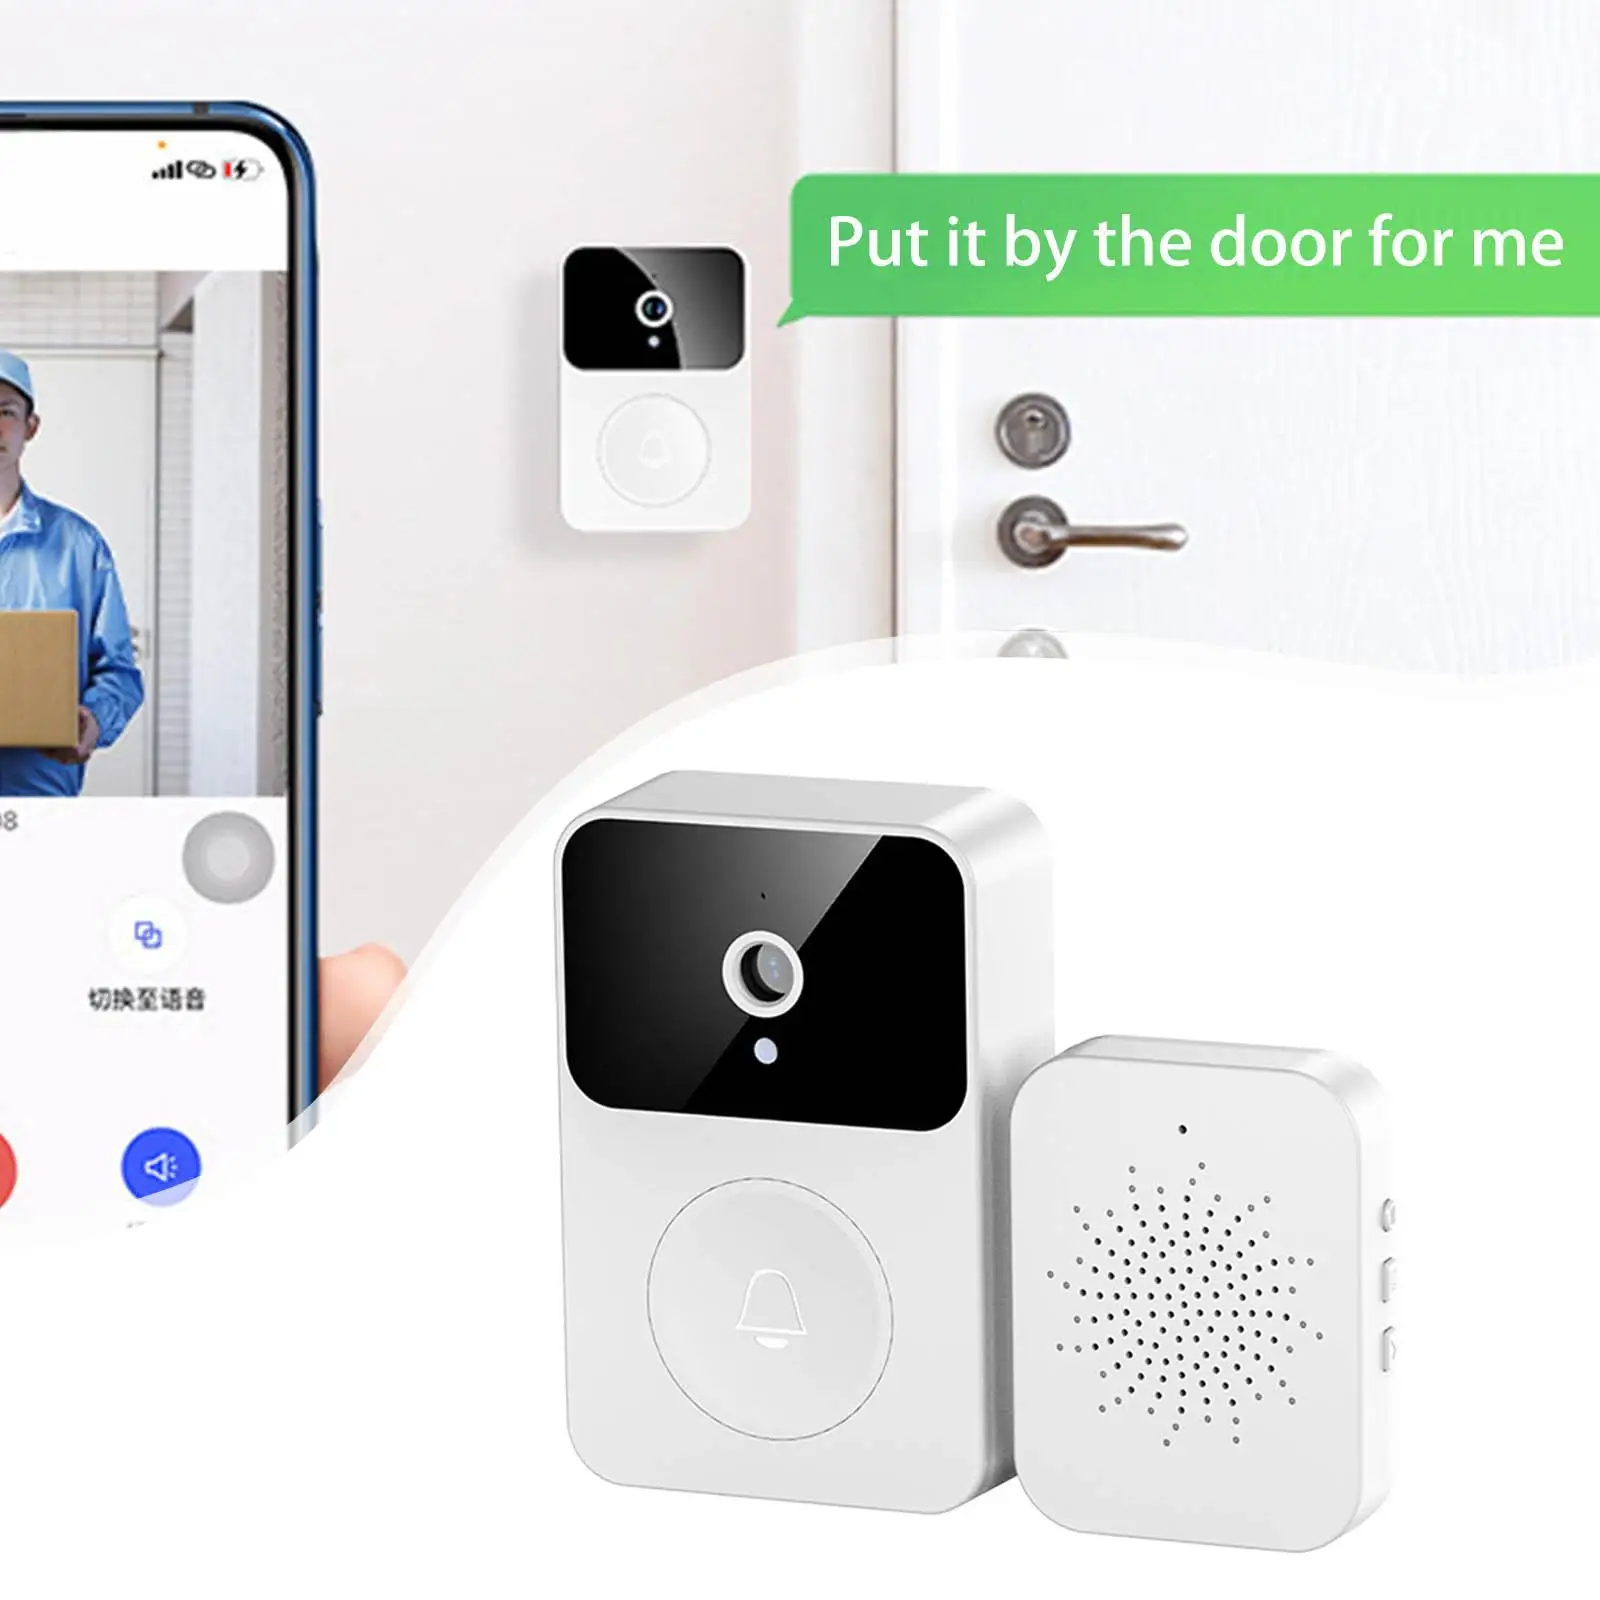 WiFi Smart Wireless Remote Video Doorbell Can Two Way Calls,Photo,App Control with Cloud Storage Home Intercom for Villa